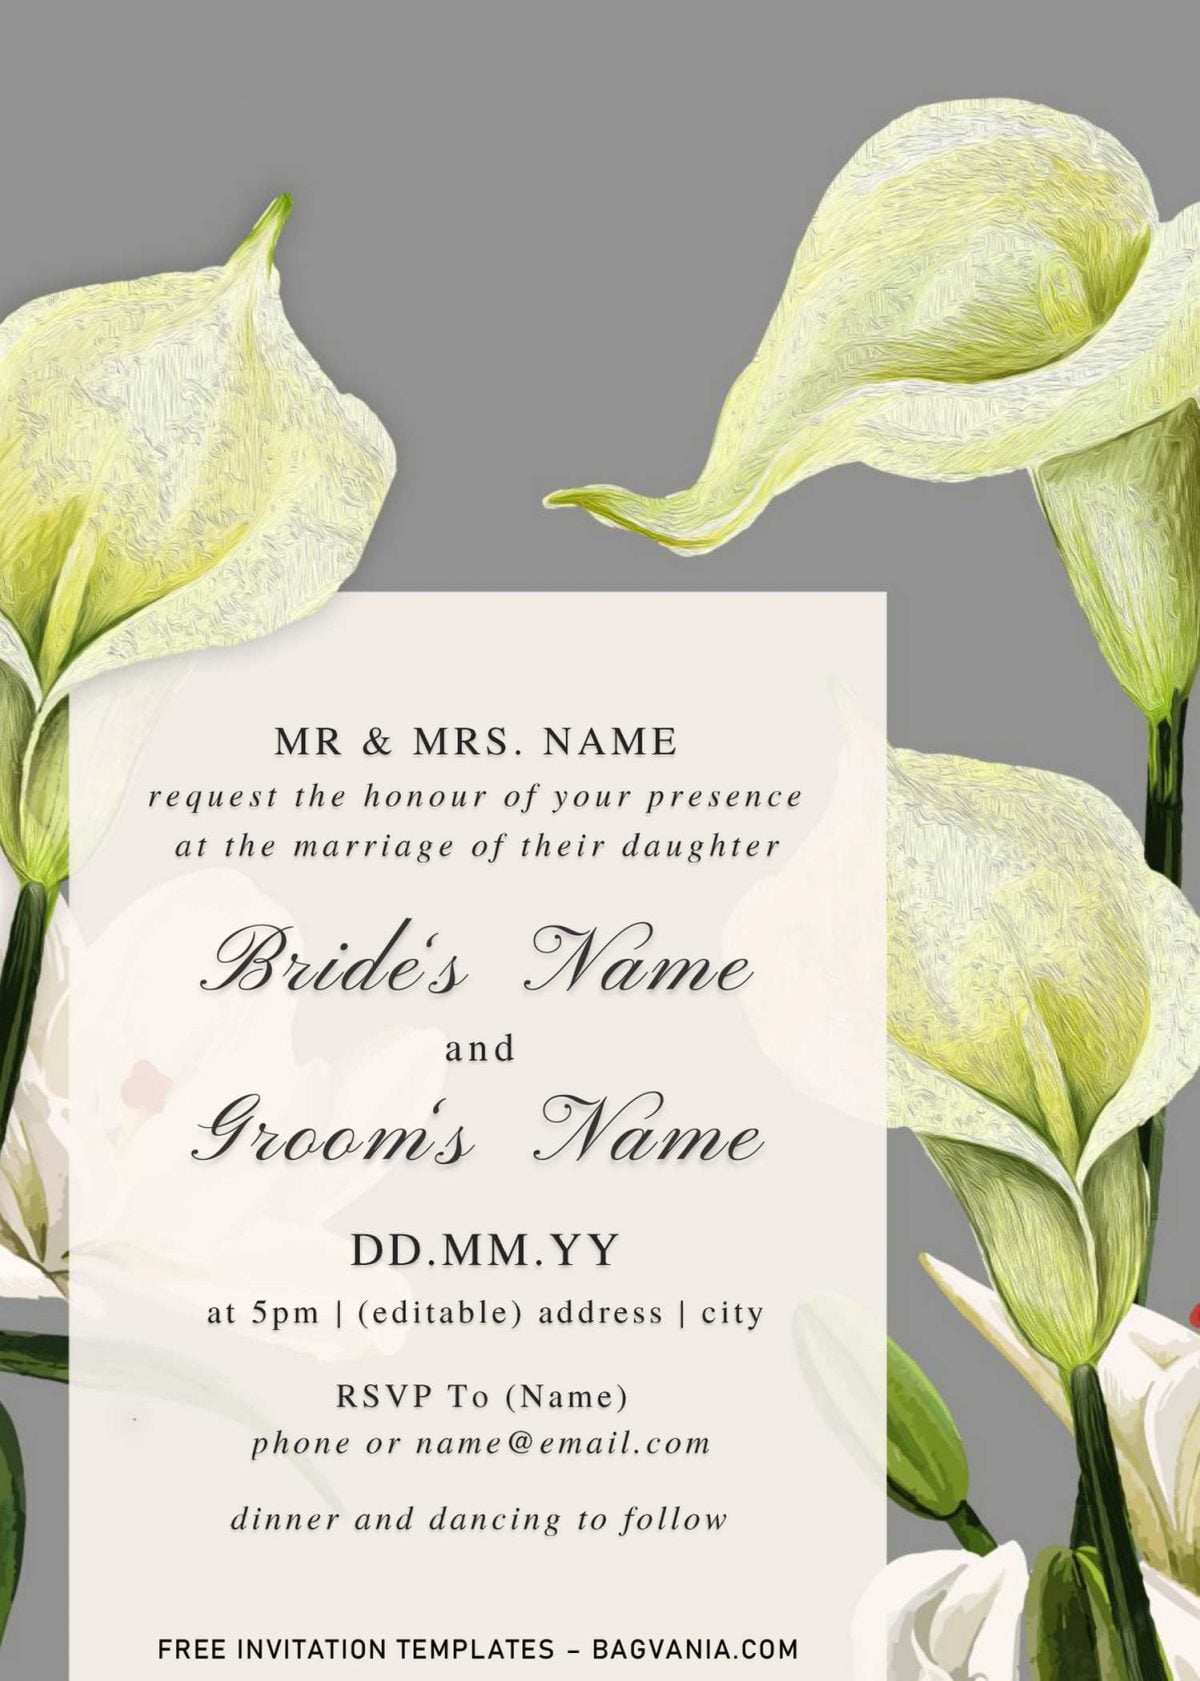 Free Watercolor Lily Wedding Invitation Templates For Word and has yellowish calla lilies